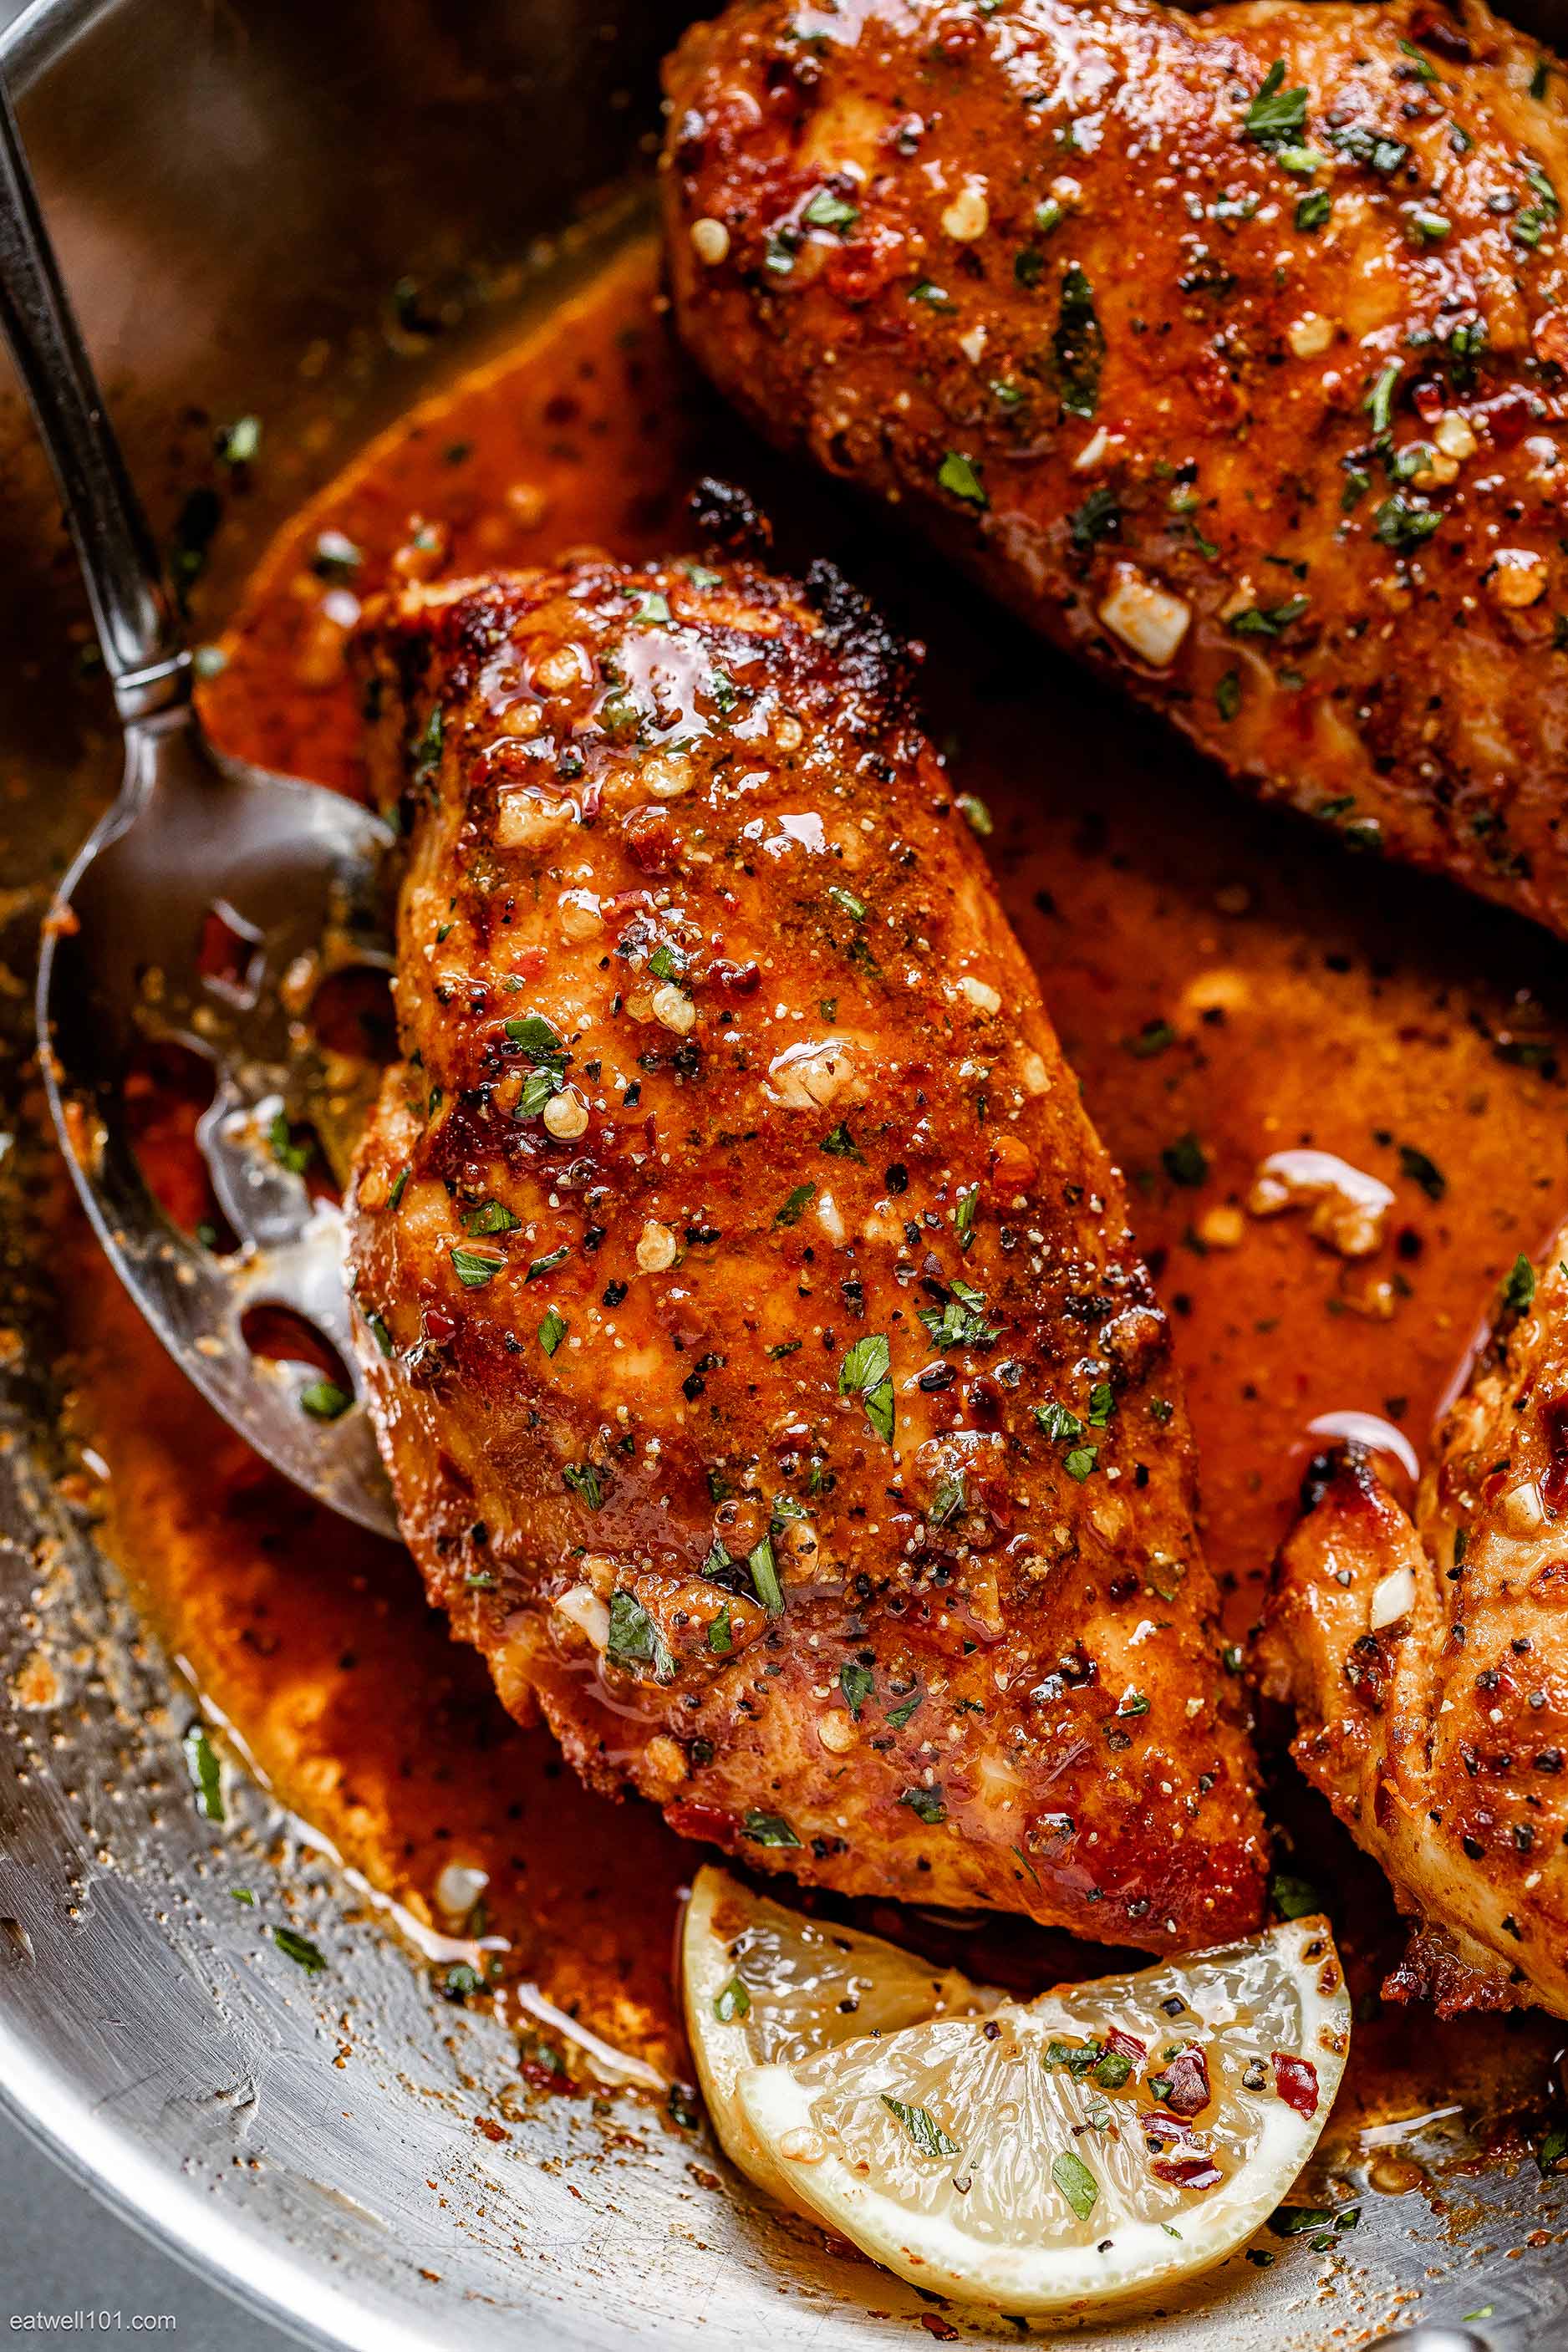 Oven-Baked Chicken Breasts Recipe with Garlic Butter Sauce – Baked